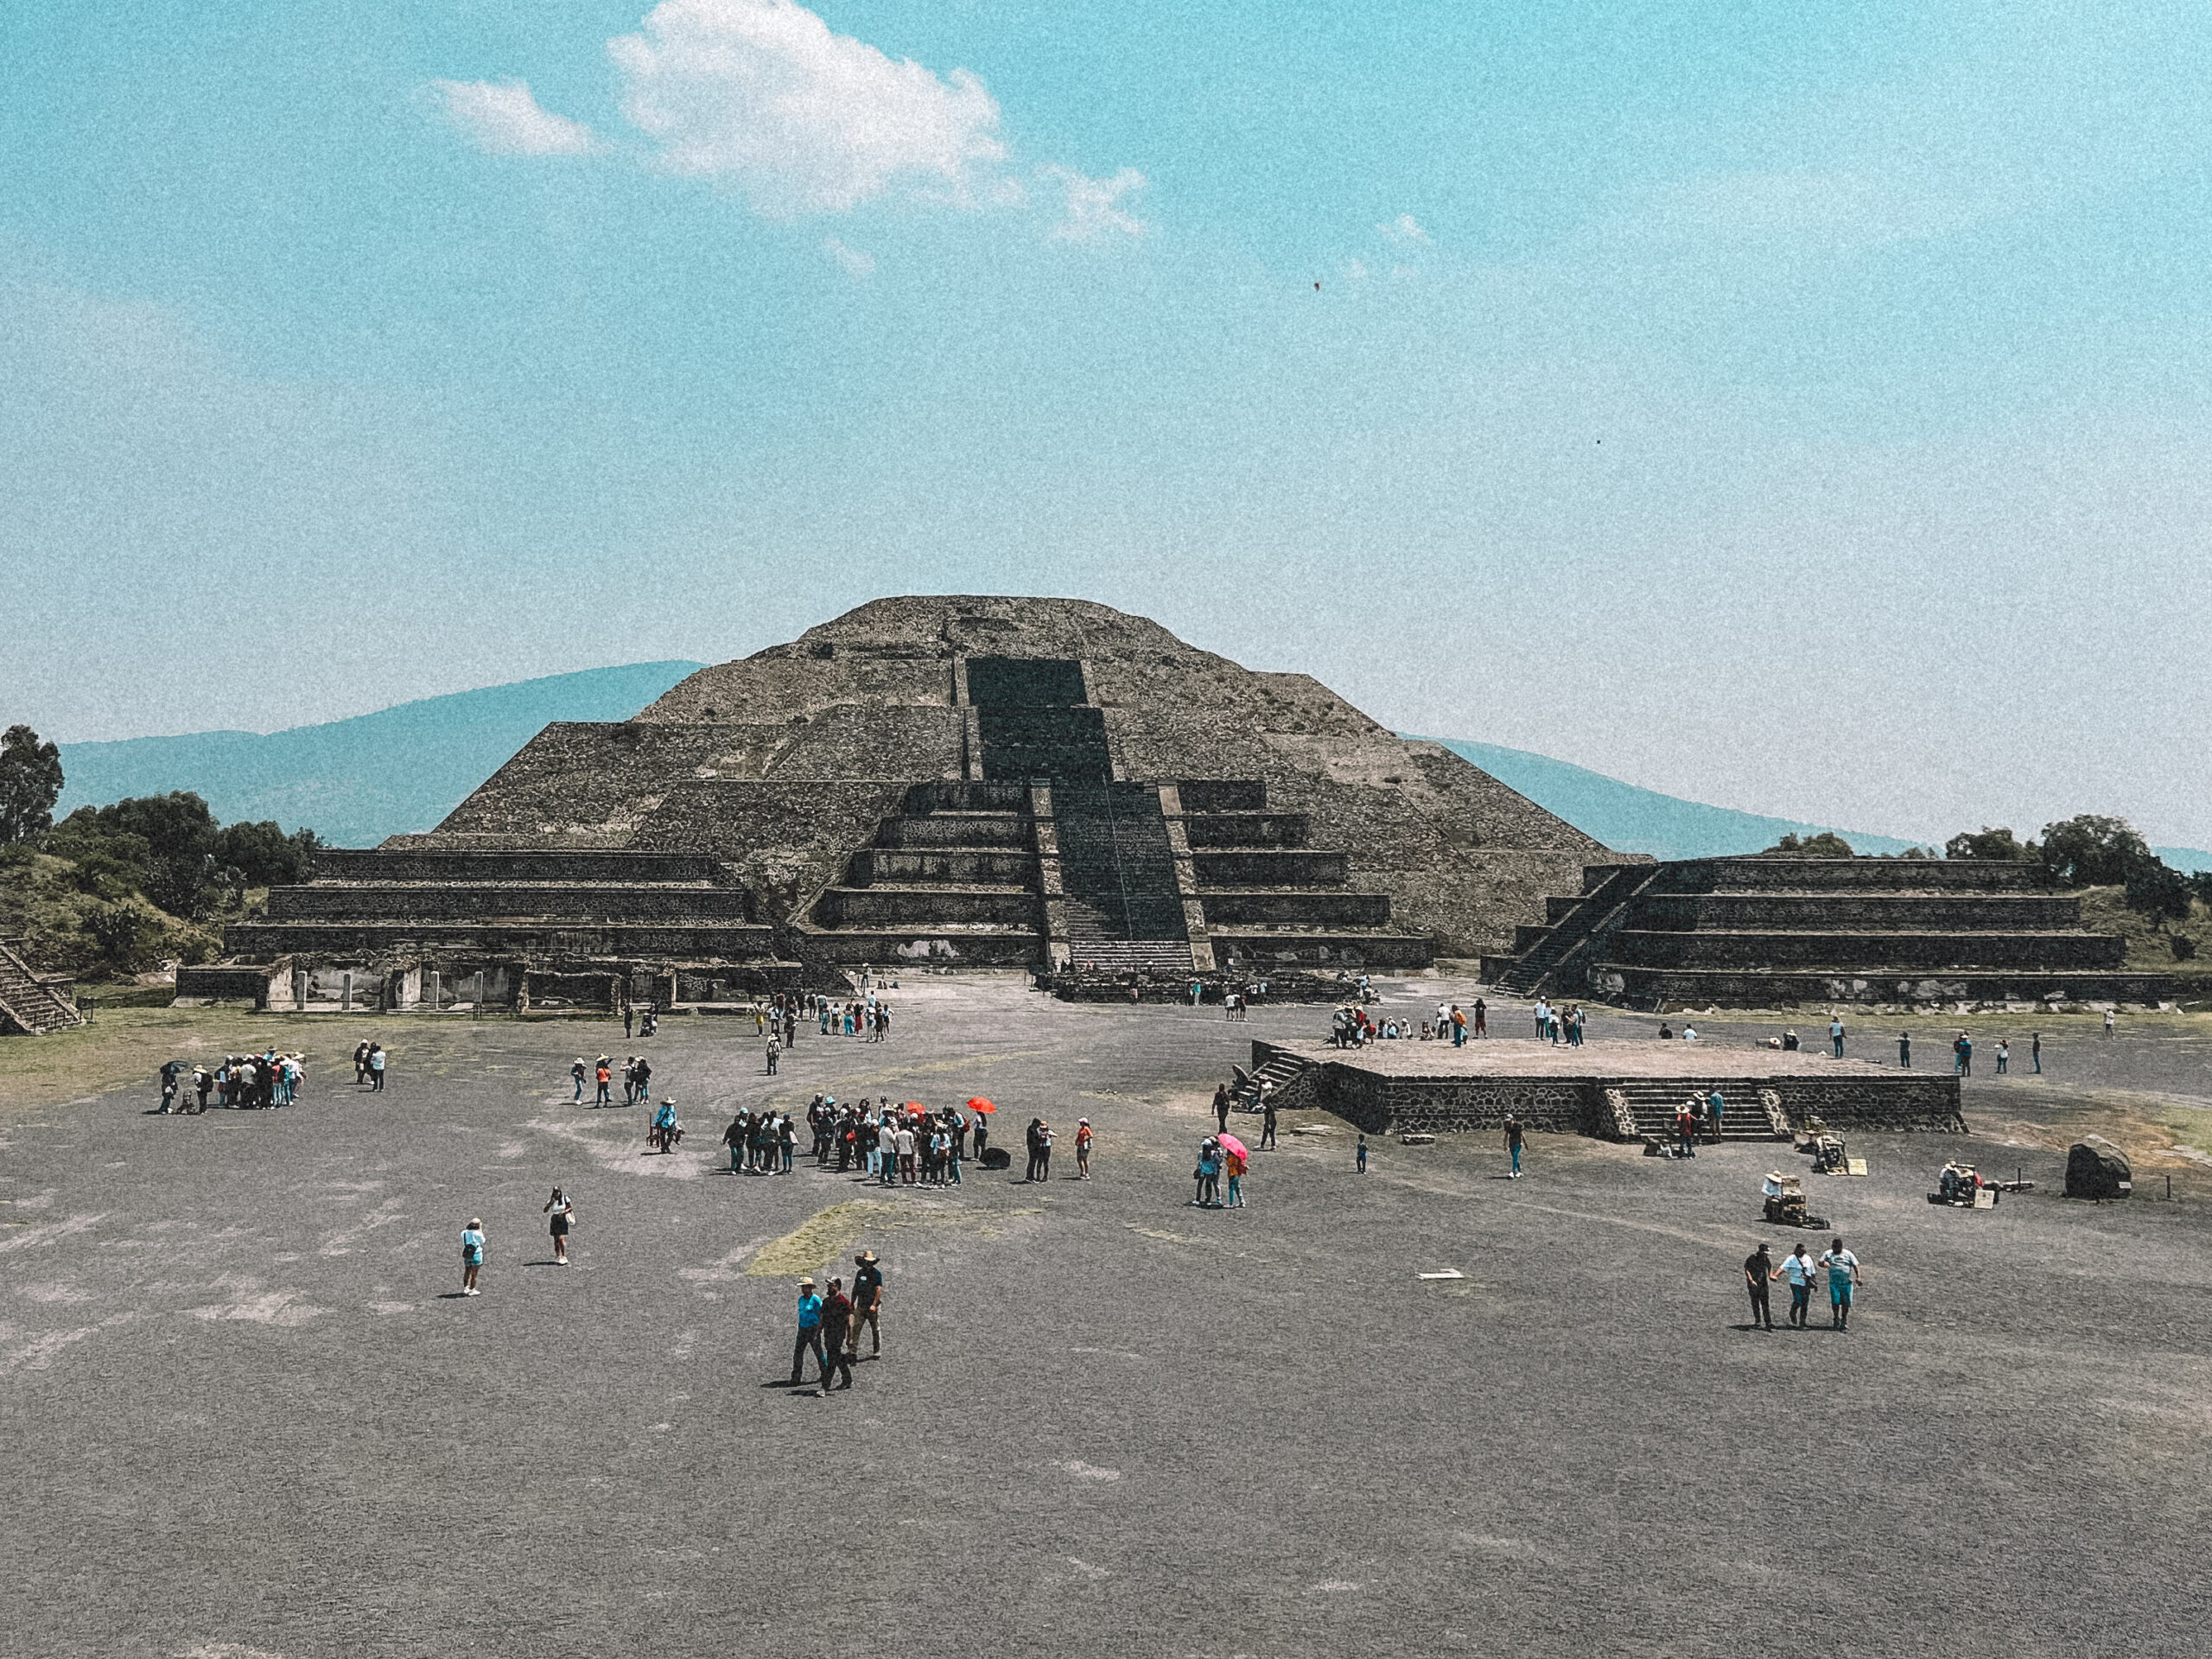 Day trip to Teotihuacan Pyramids from Mexico City